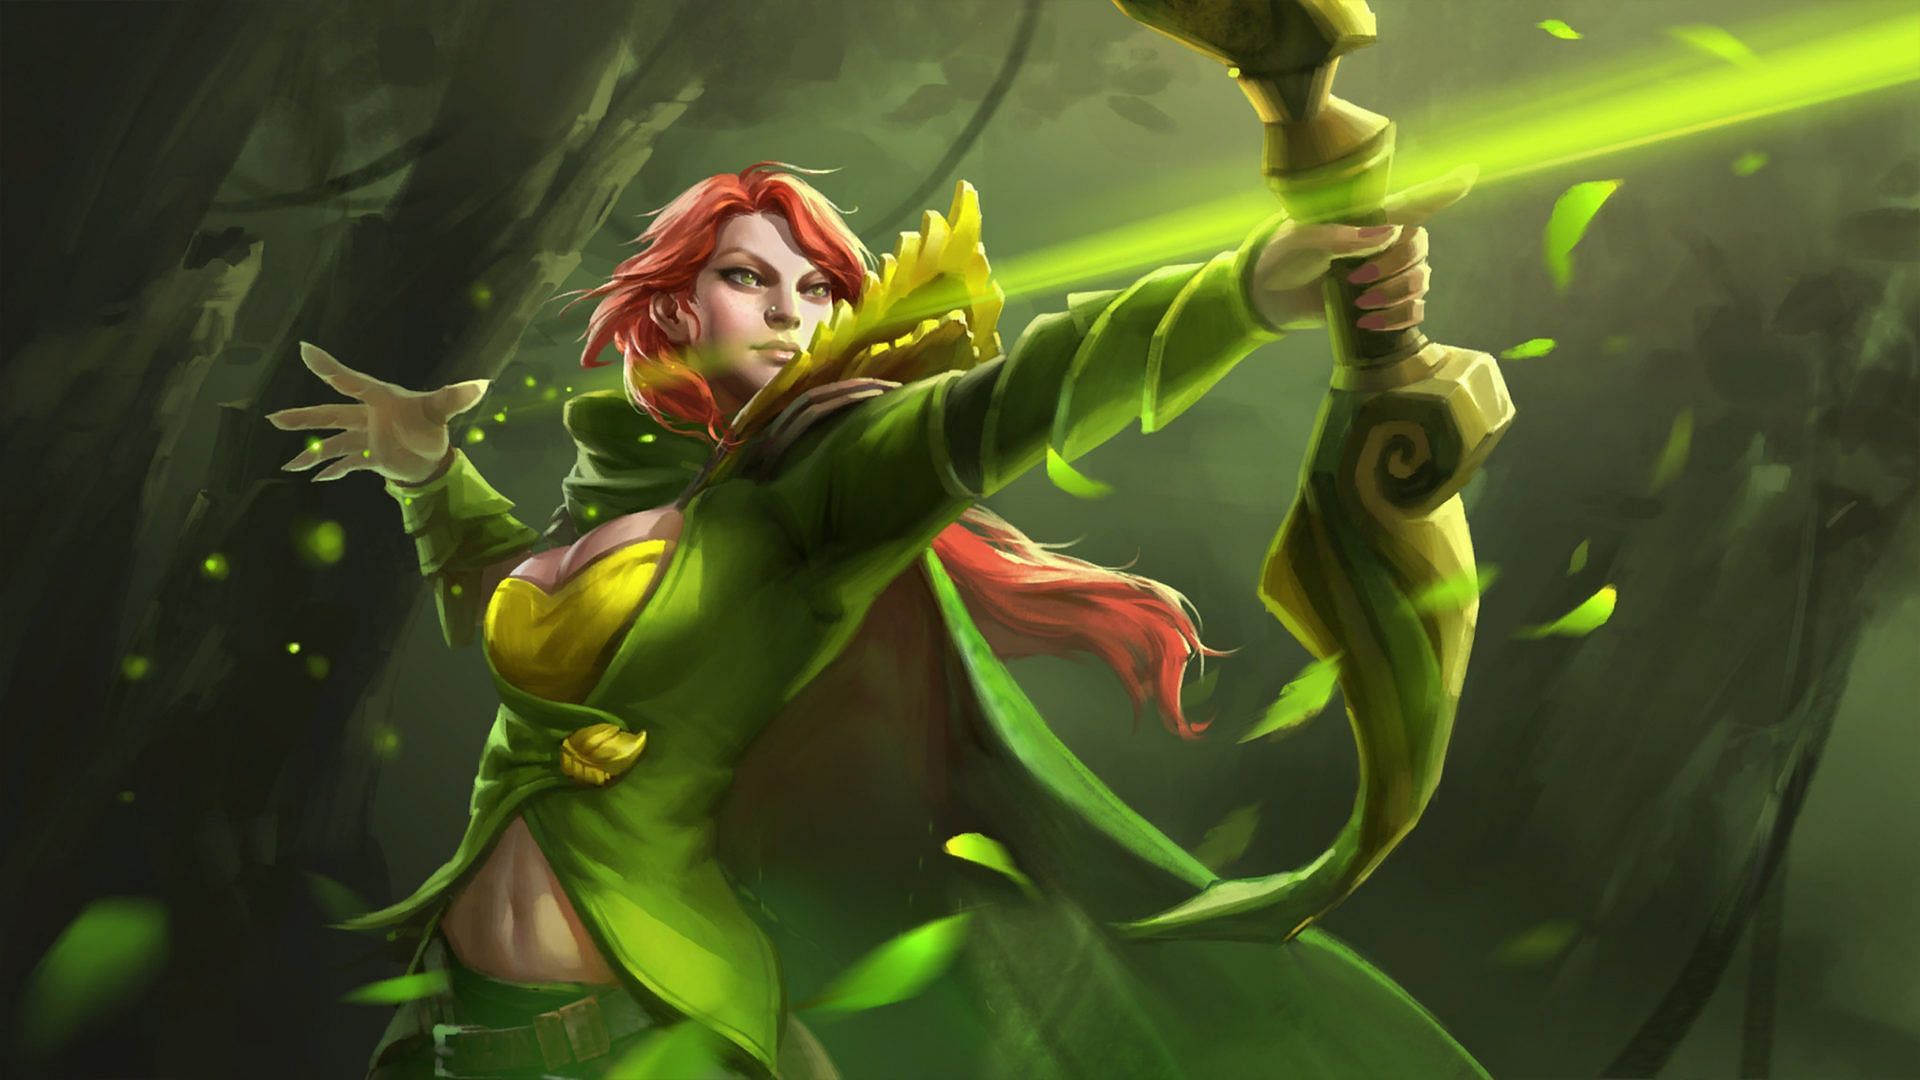 Windranger takes aim with her trusty bow, ready to unleash a barrage of arrows and shatter her foes (Image via DOTA 2)